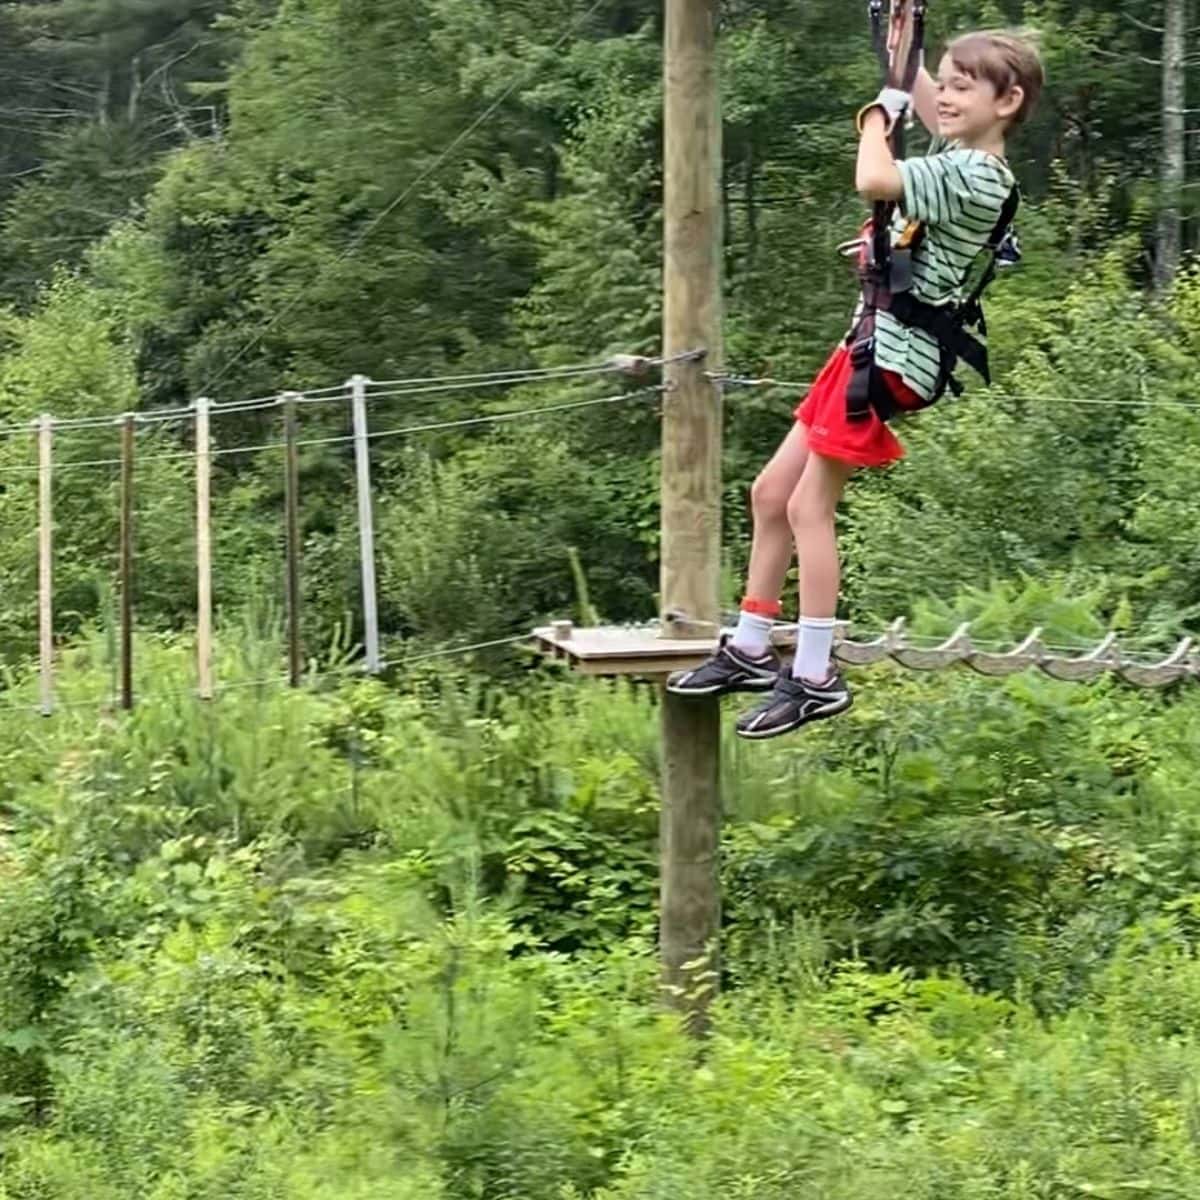 A child zip lining on a rope course